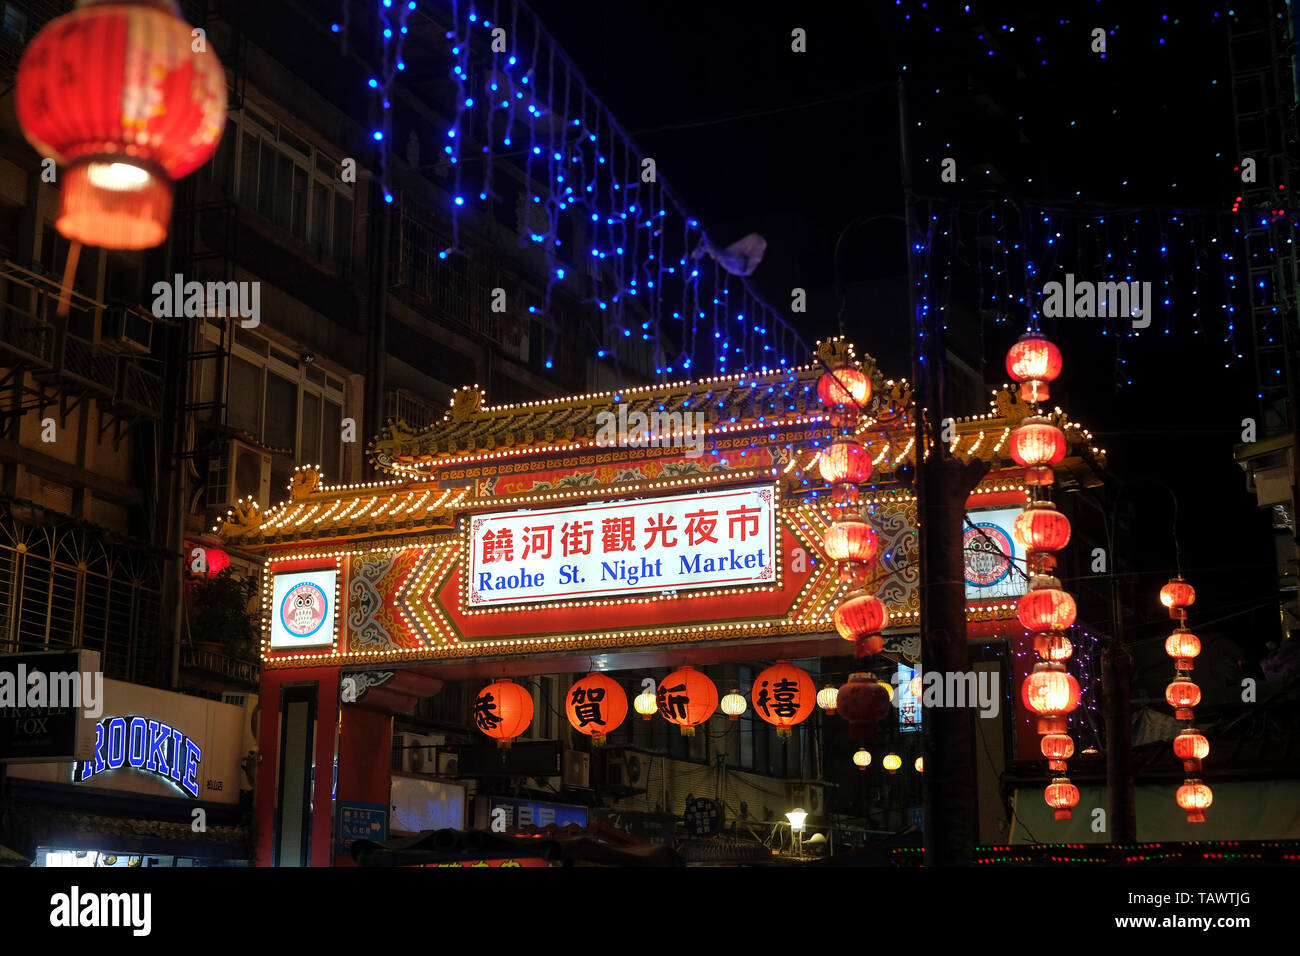 The decorated paifang to the Raohe Street Night Market one of the oldest night markets in Songshan District, Taipei, Taiwan. Stock Photo